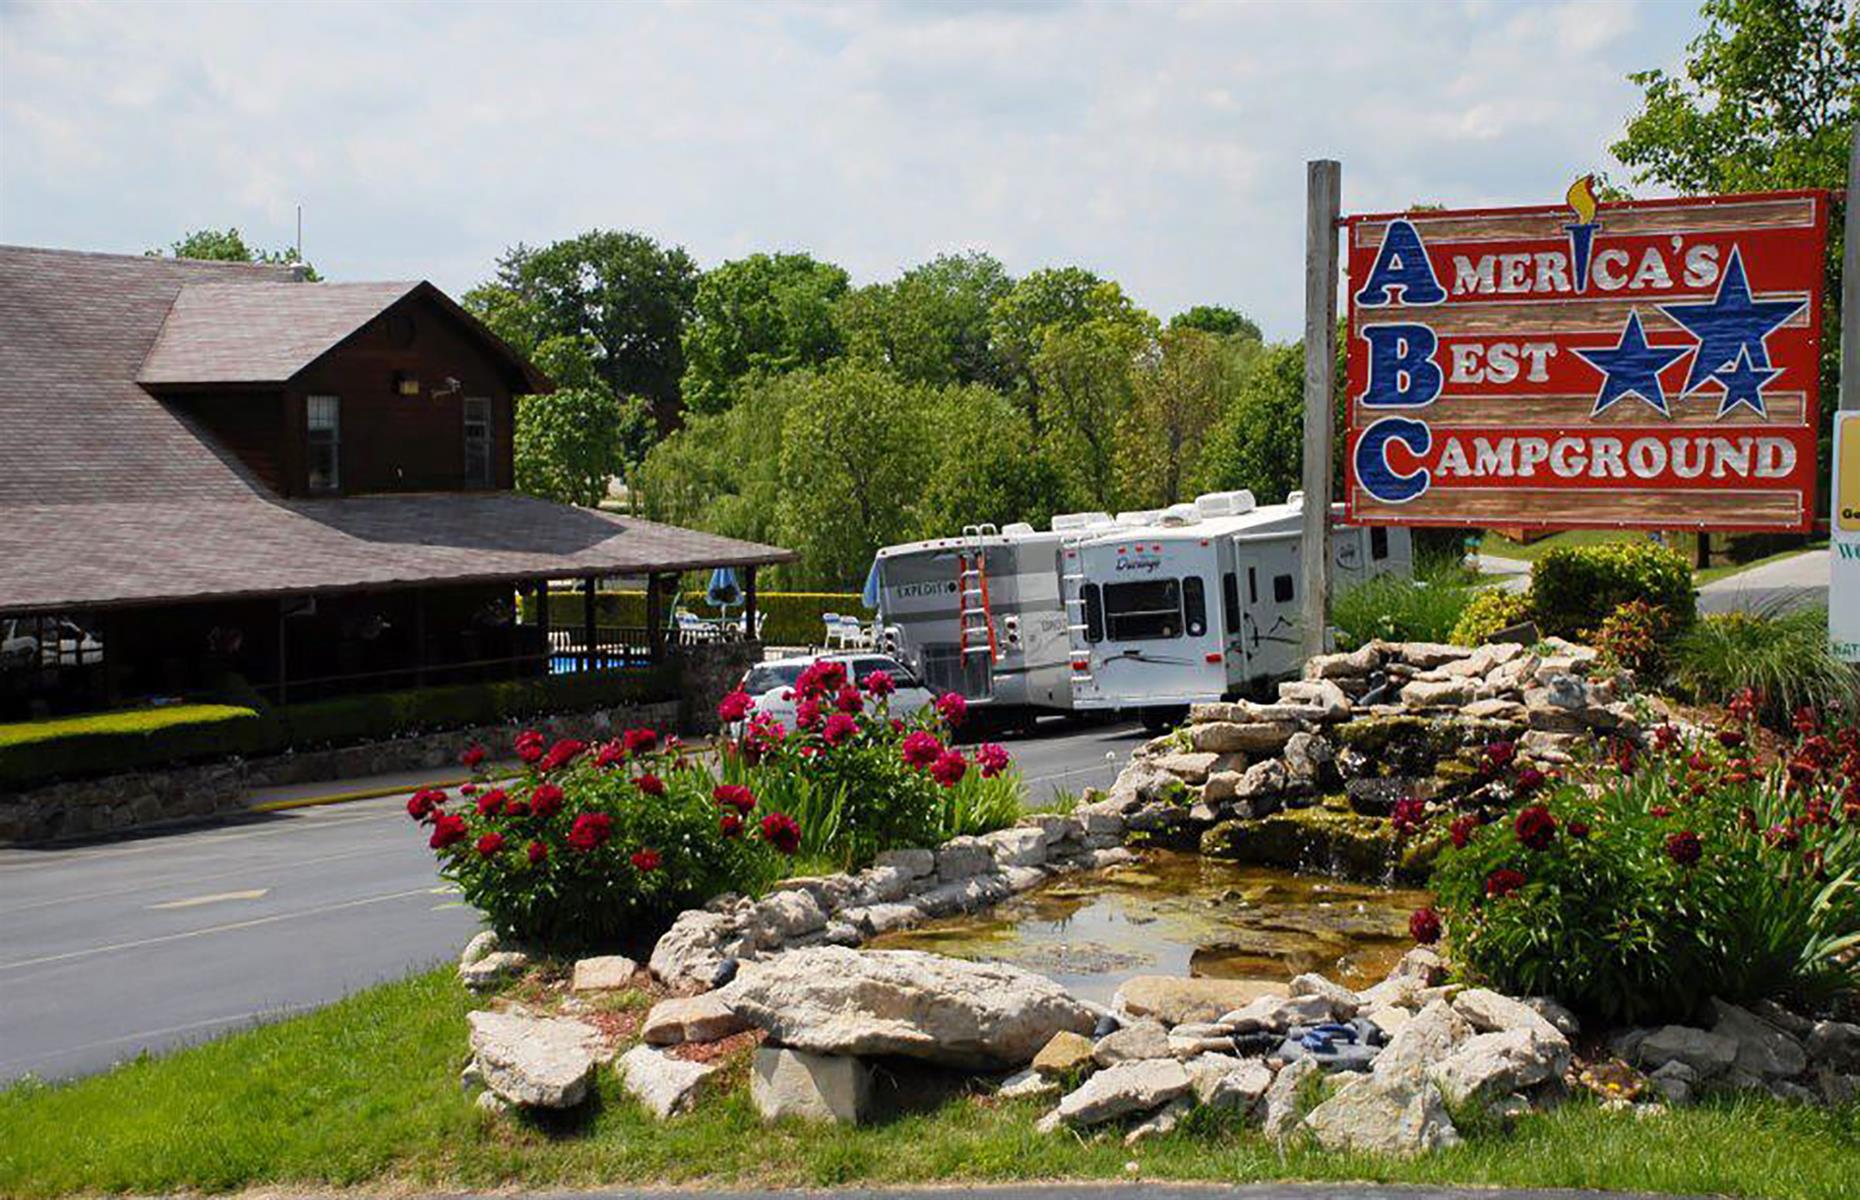 <p>The name <a href="http://www.abc-branson.com/">America's Best Campground</a> is a bold statement indeed – but this site does have a lot going for it. There are several good RV parks in the area, but this family-owned option comes up trumps with a large pool, spa (check the opening status of amenities before booking) and helpful staff. Every RV space is a full hook-up site with a smooth patio, grill, picnic tables and free satellite TV. </p>